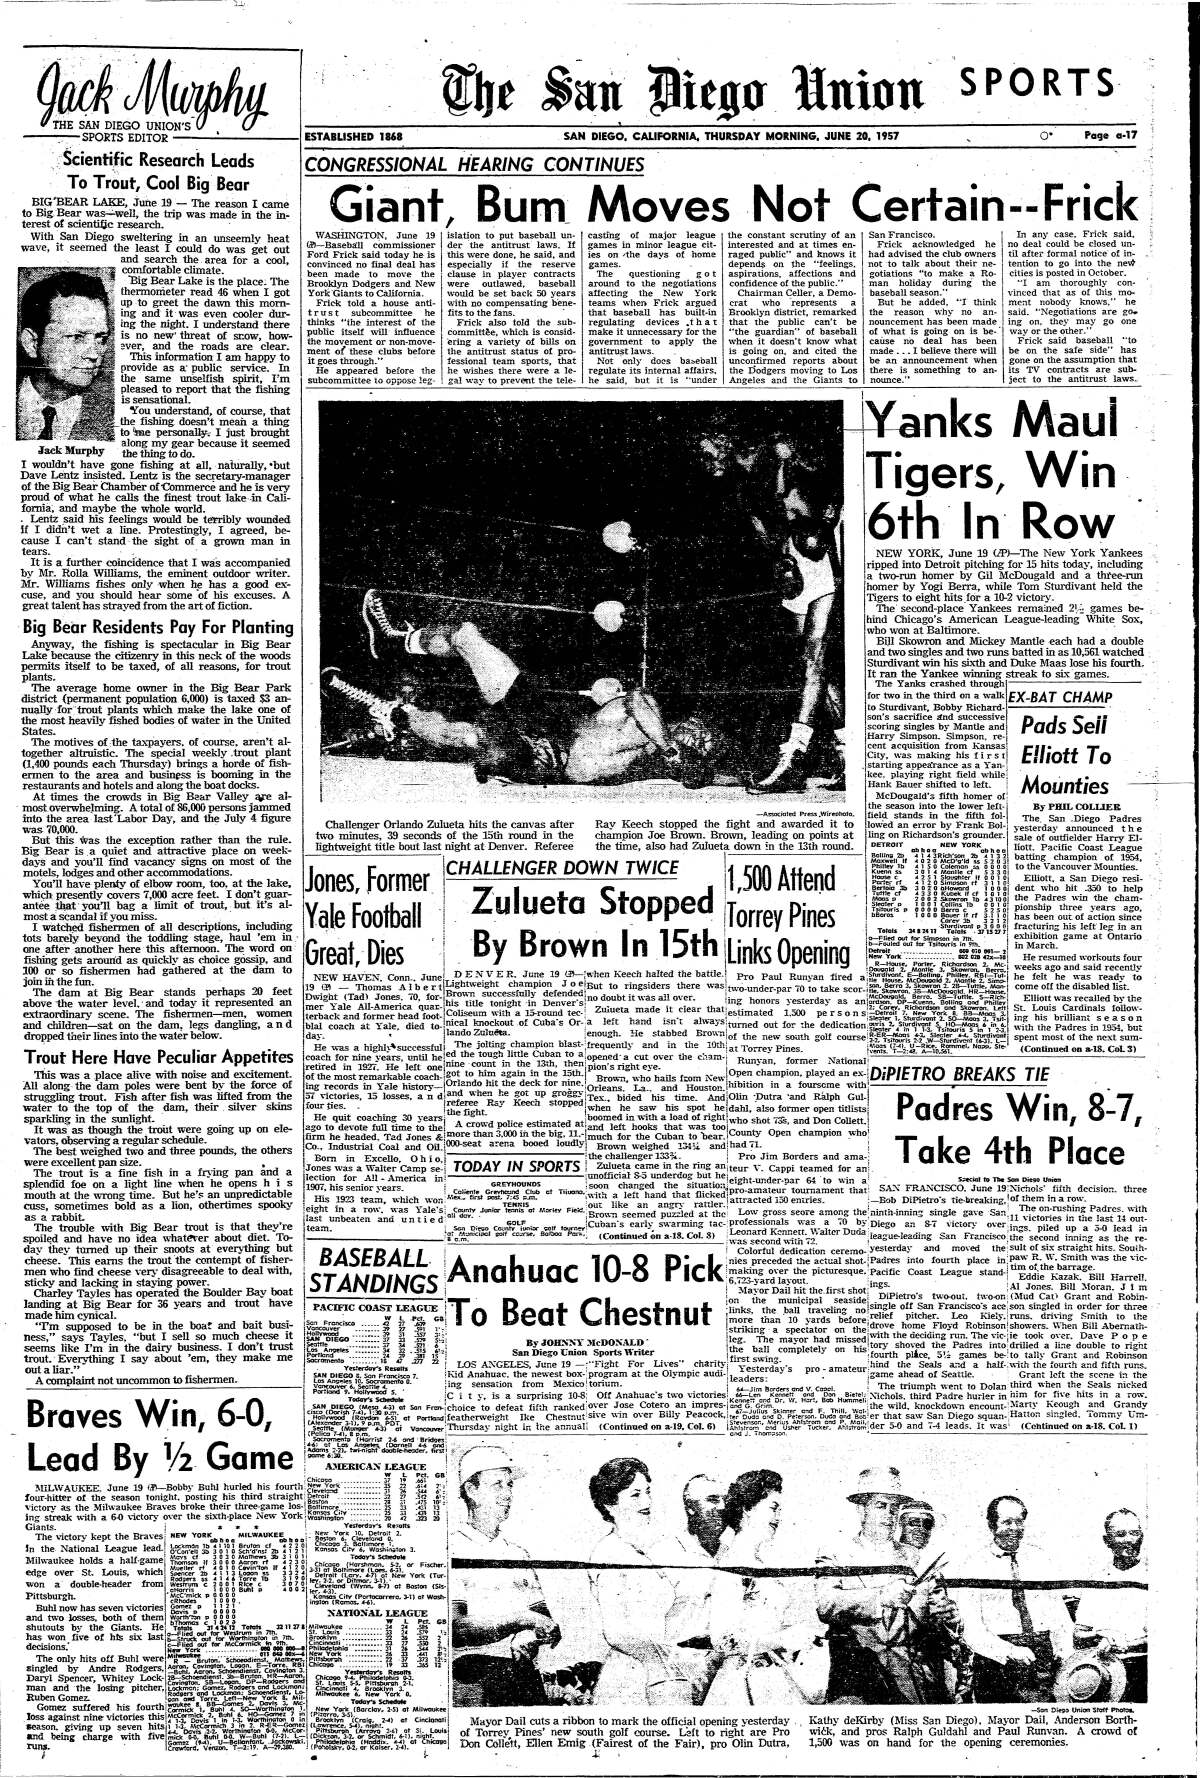 A Sports page from The San Diego Union-Tribune on June 20, 1957 